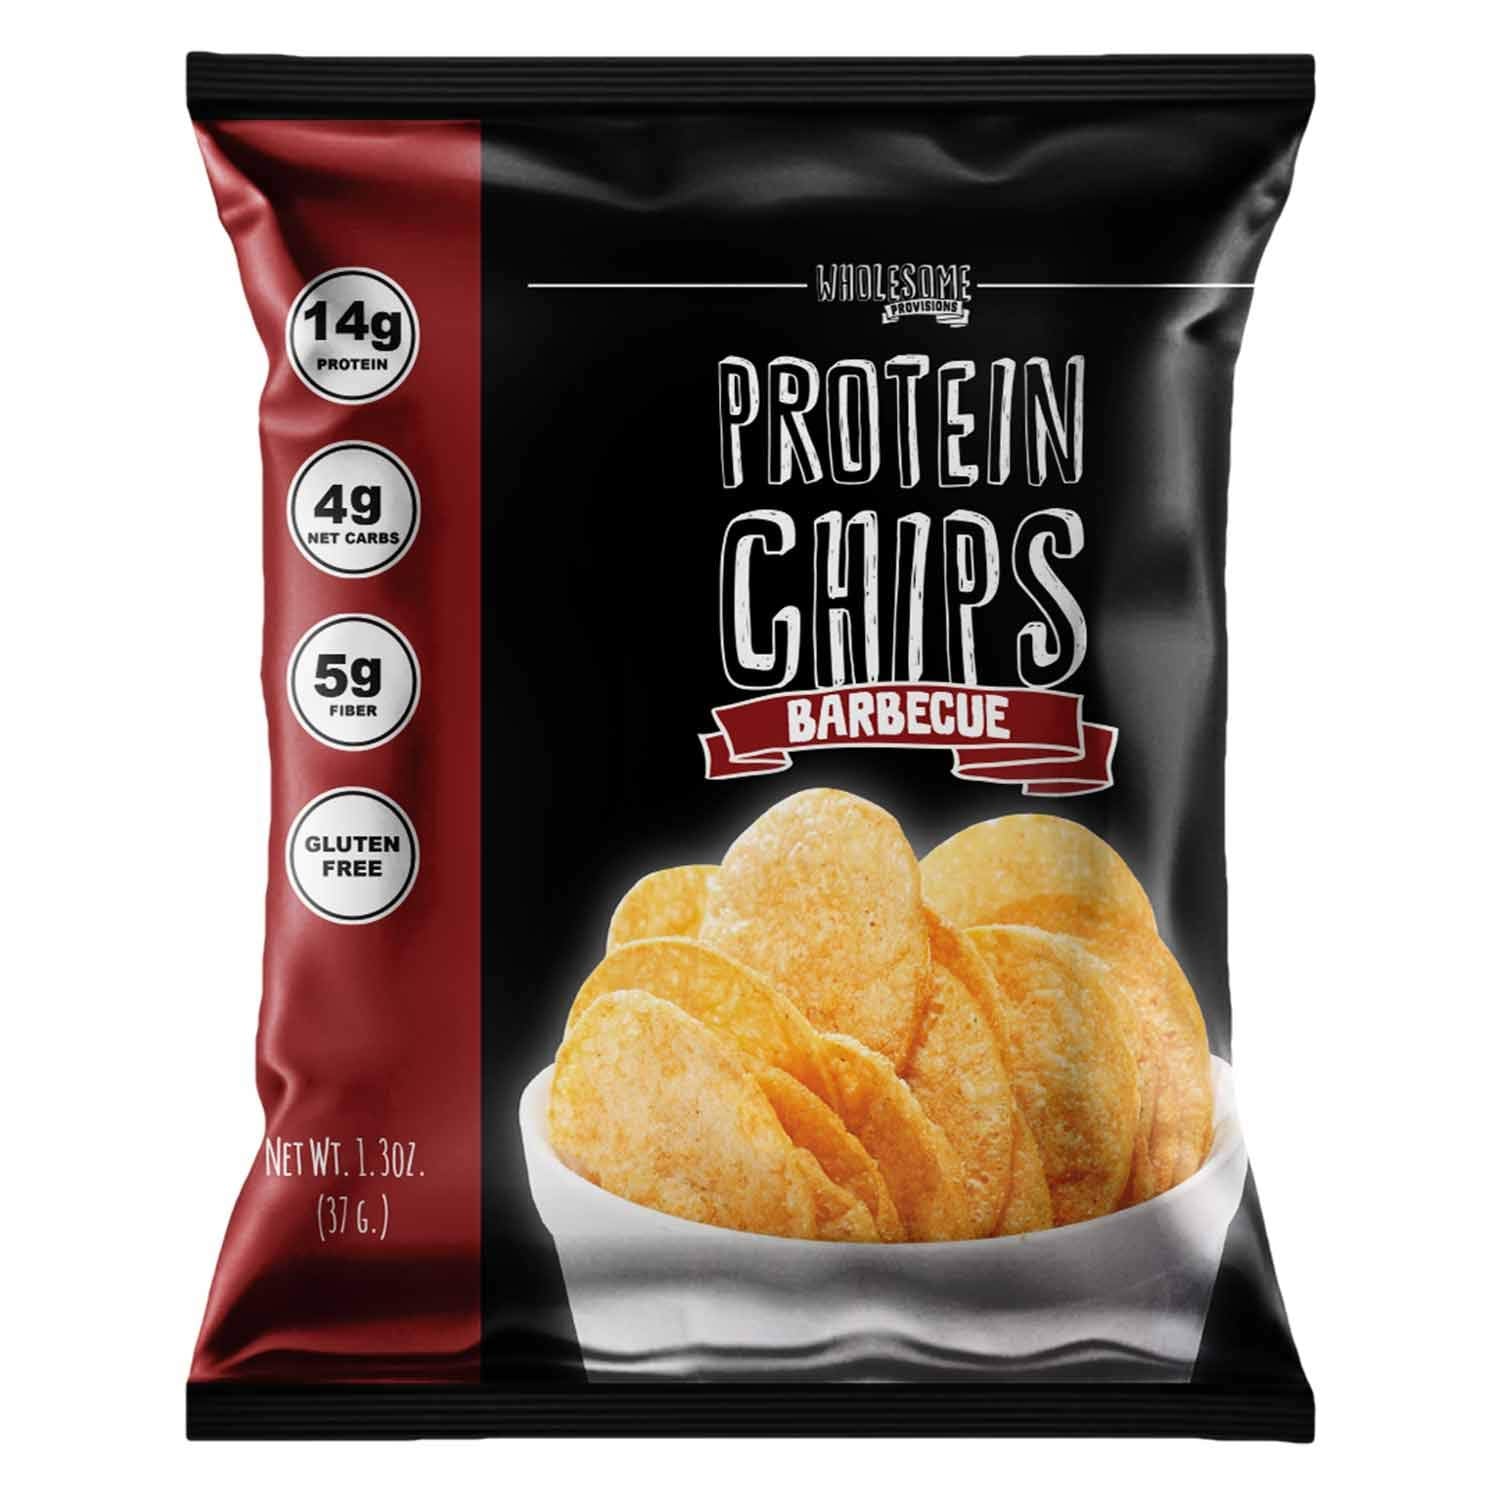 Protein Chips, 14g Protein, 3g-4g Net Carbs, Gluten Free, Keto Snacks, Low Carb Snacks, Protein Crisps, Keto-Friendly, Made in USA (Barbecue)